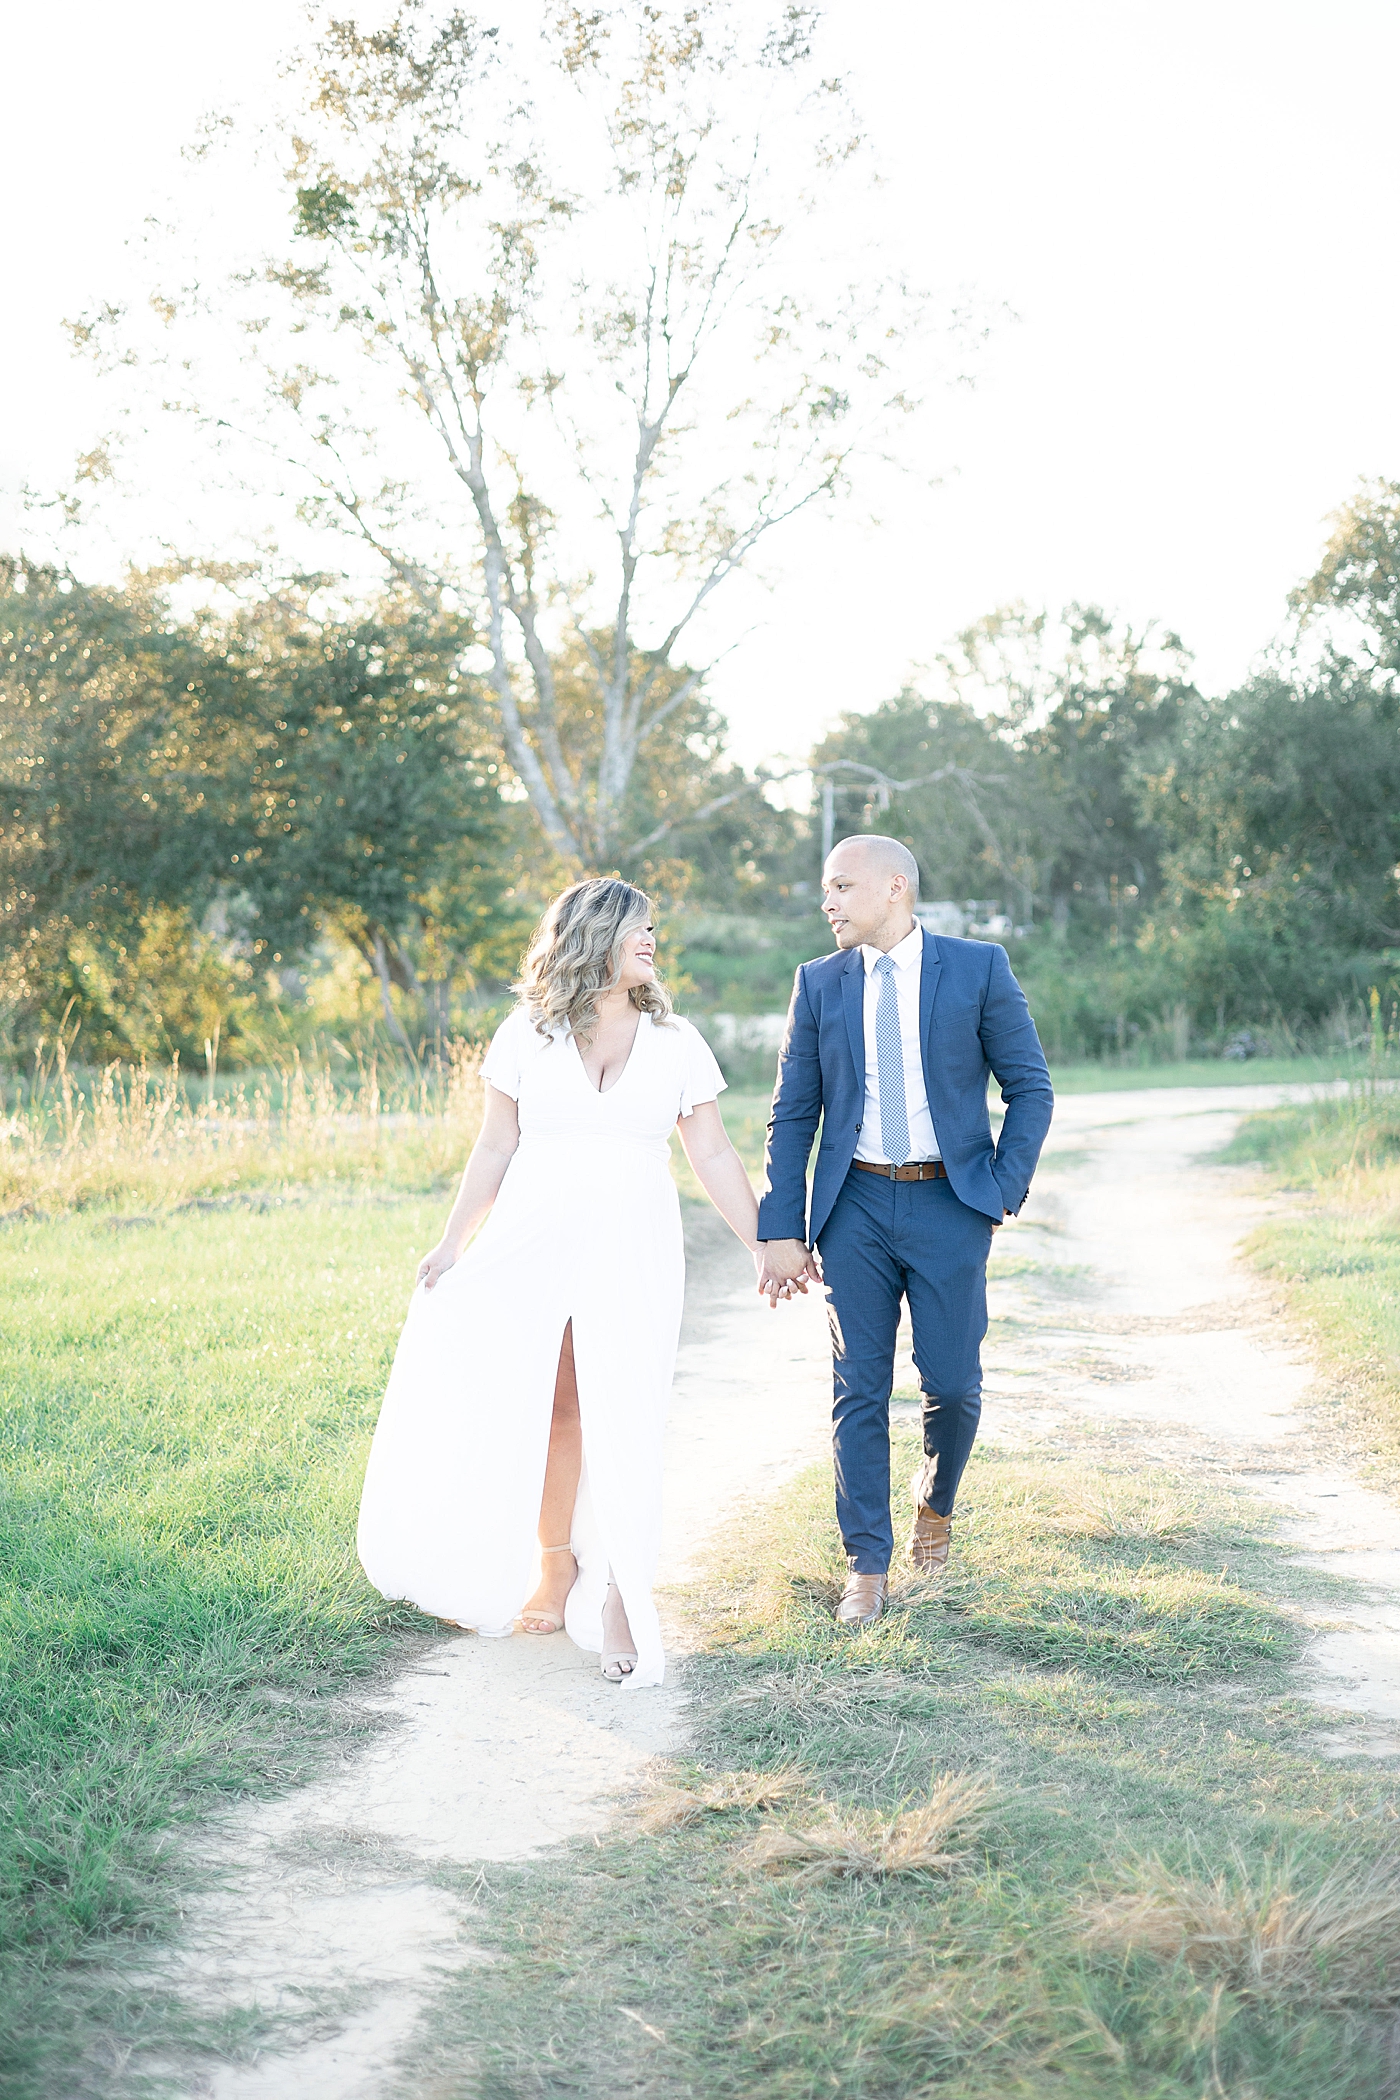 Mom and dad to be walking a dirt path | Photo by Gulfport MS Maternity and Newborn Photographer Little Sunshine Photography 